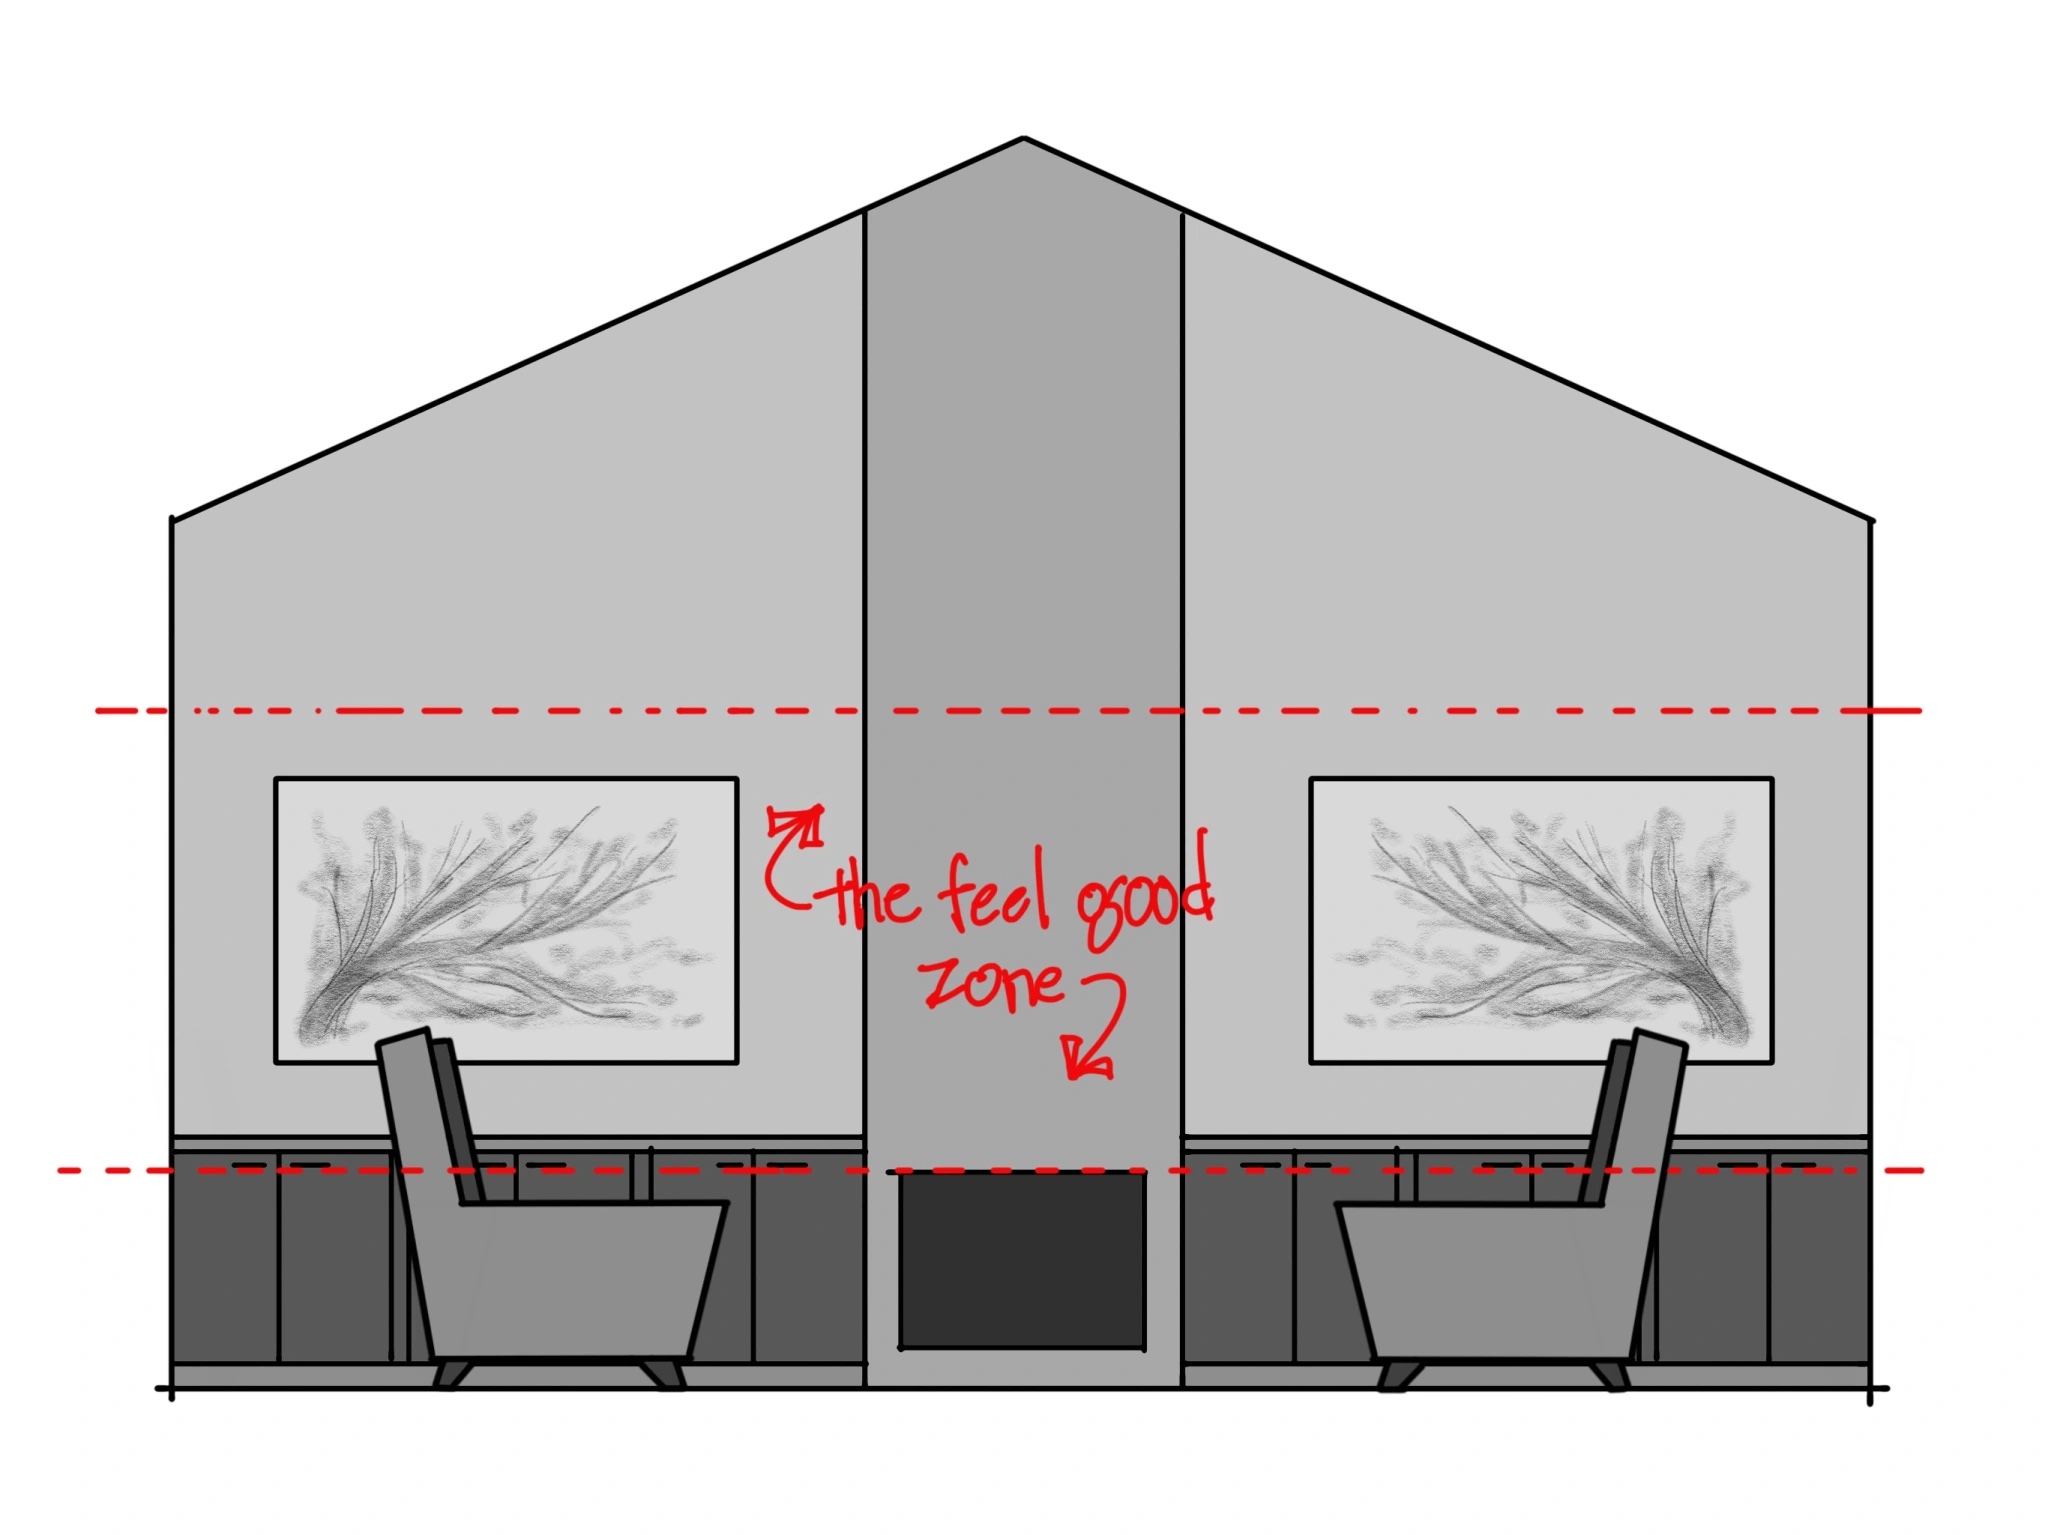 An illustrated diagram depicting a living room with two easy chairs facing each other, each underneath a window to the outdoors. A mantle is on the far wall between the chairs. Two dotted red lines block off a horizontal section in the middle of the room, labeled in red text as "the feel good zone."